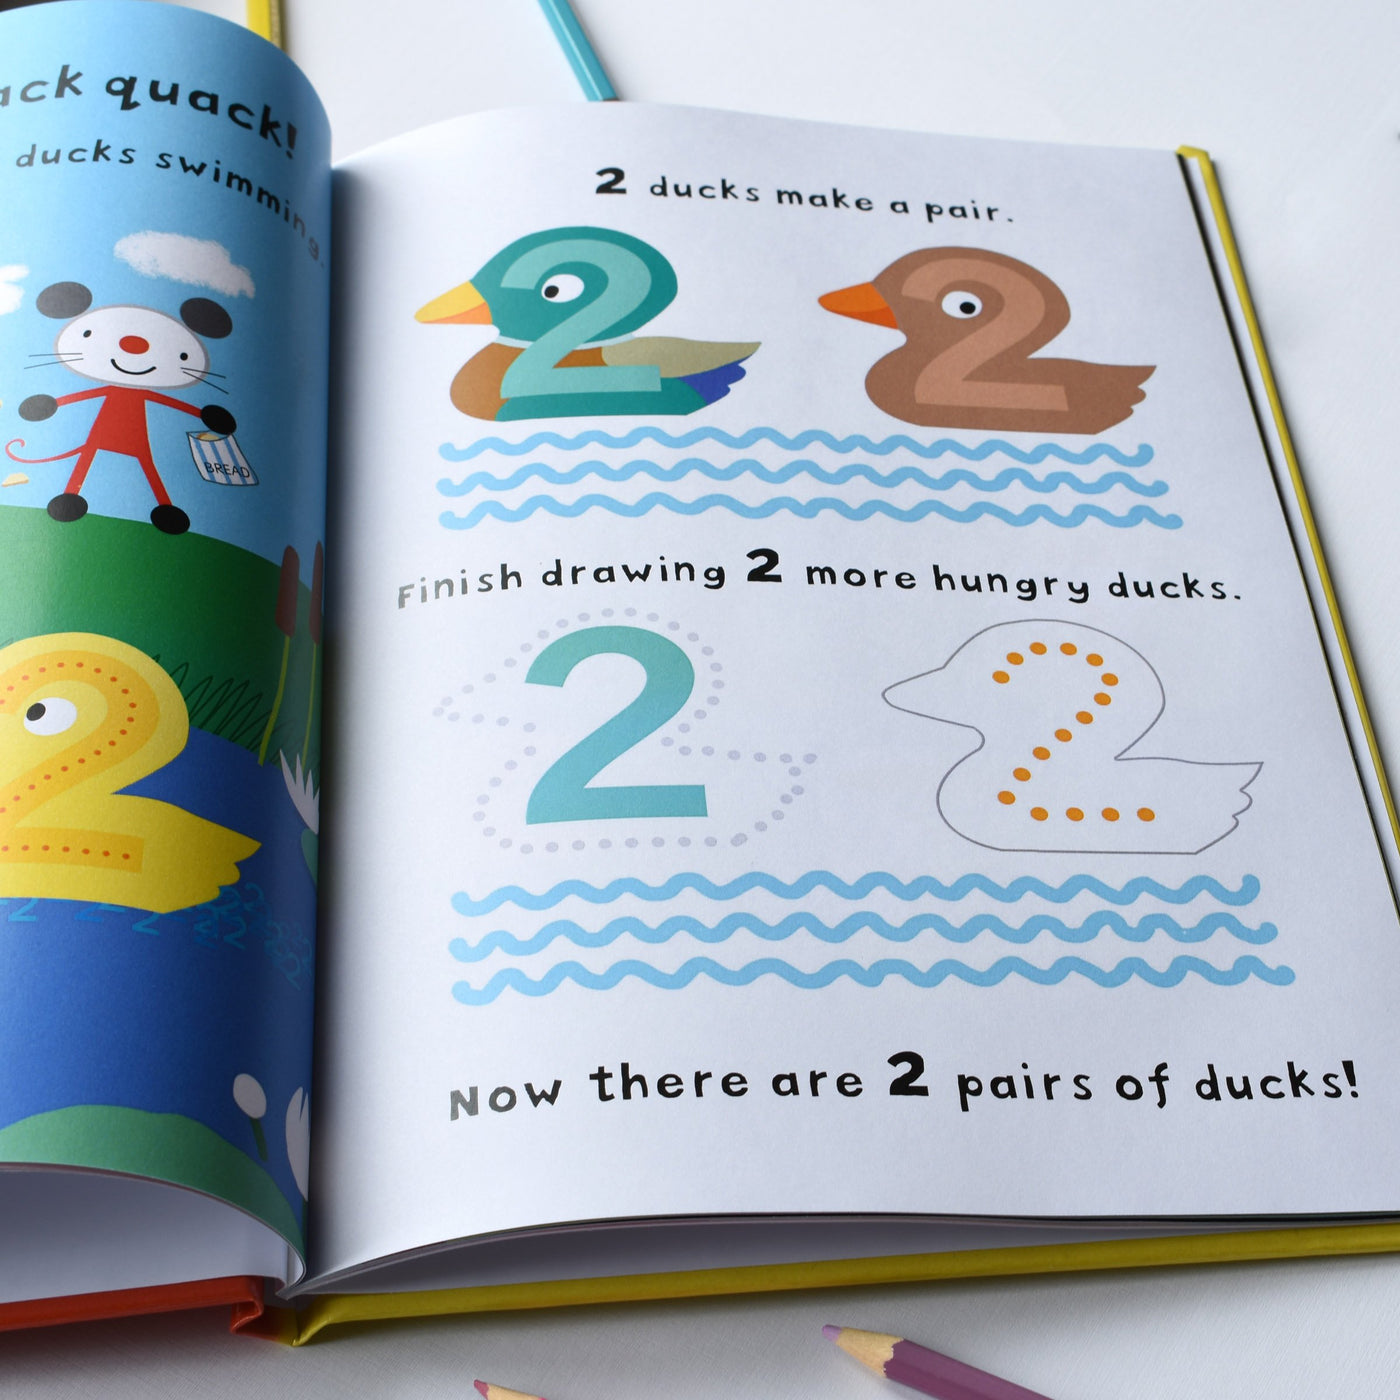 Personalised Arty Mouse Numbers Activity Book - Shop Personalised Gifts